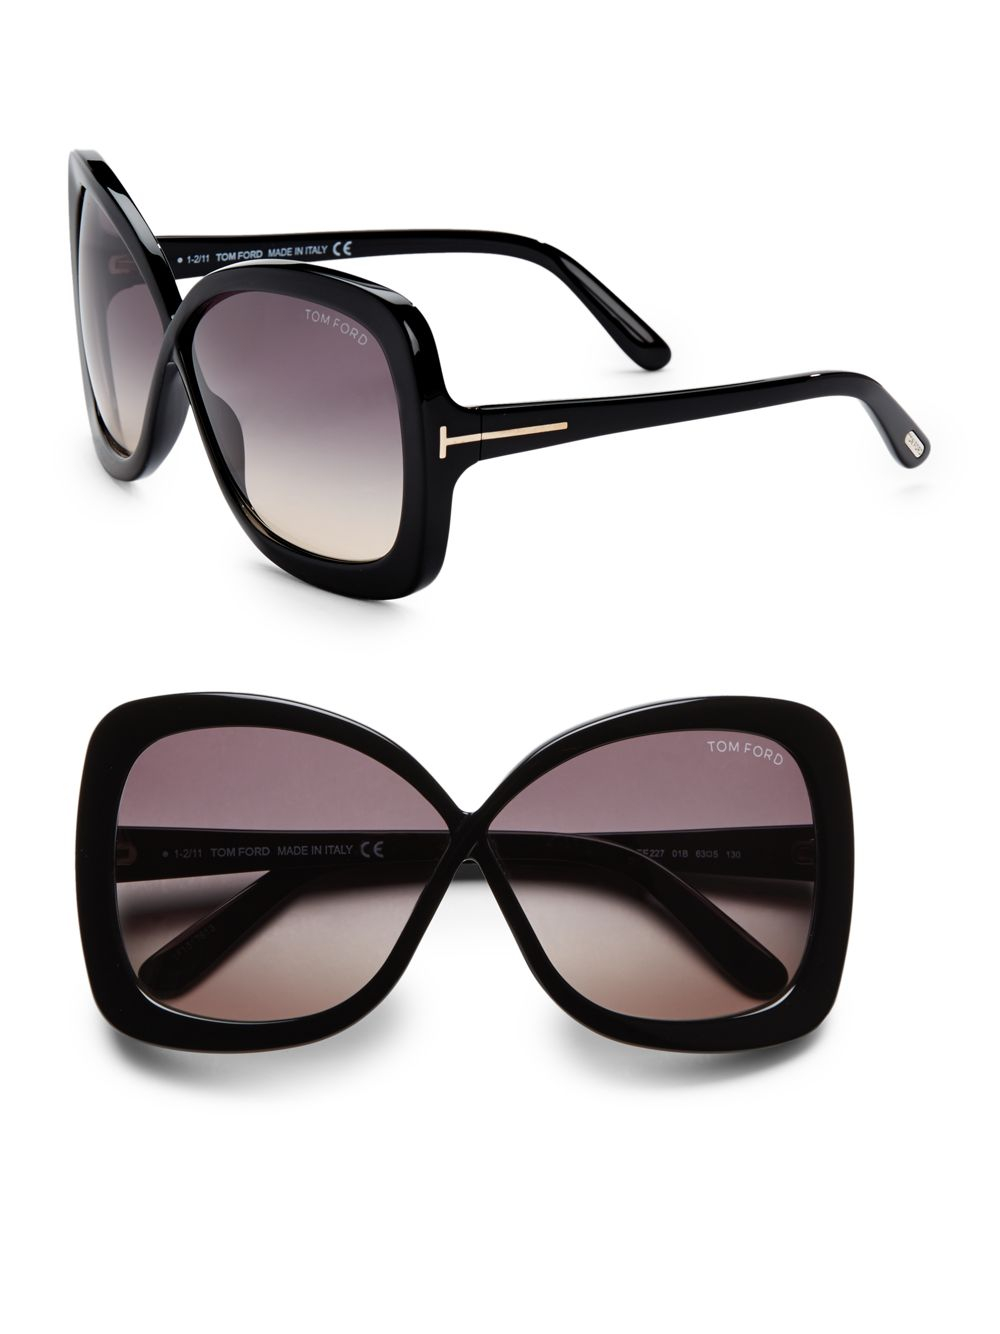 Tom ford Oversized Square Acetate Sunglasses in Black | Lyst